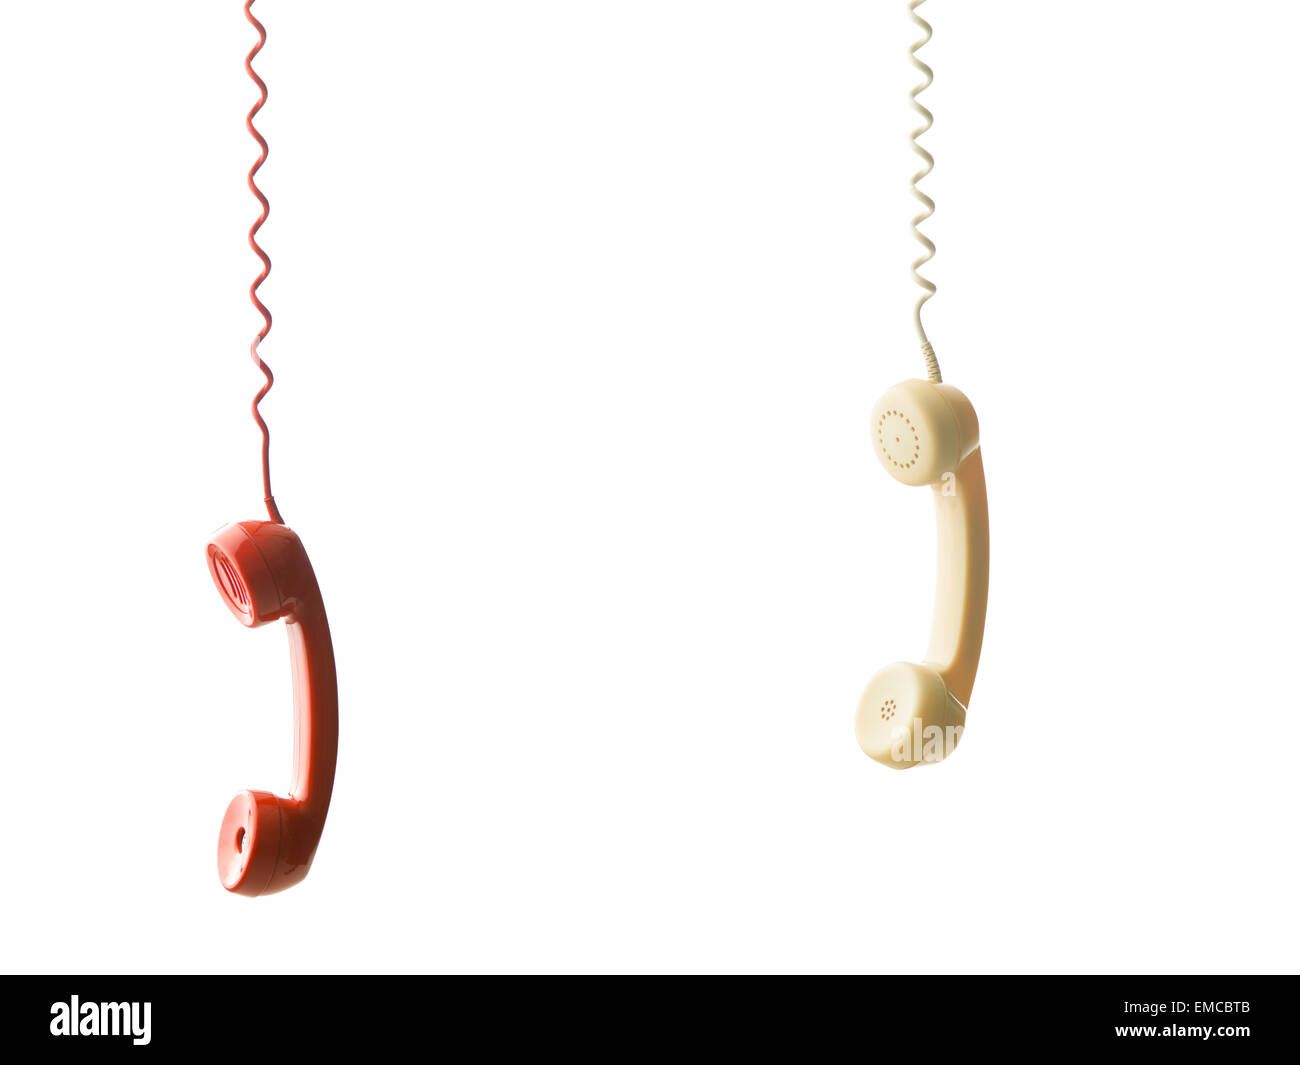 two different handsets from vintage phones hanging, on white background Stock Photo